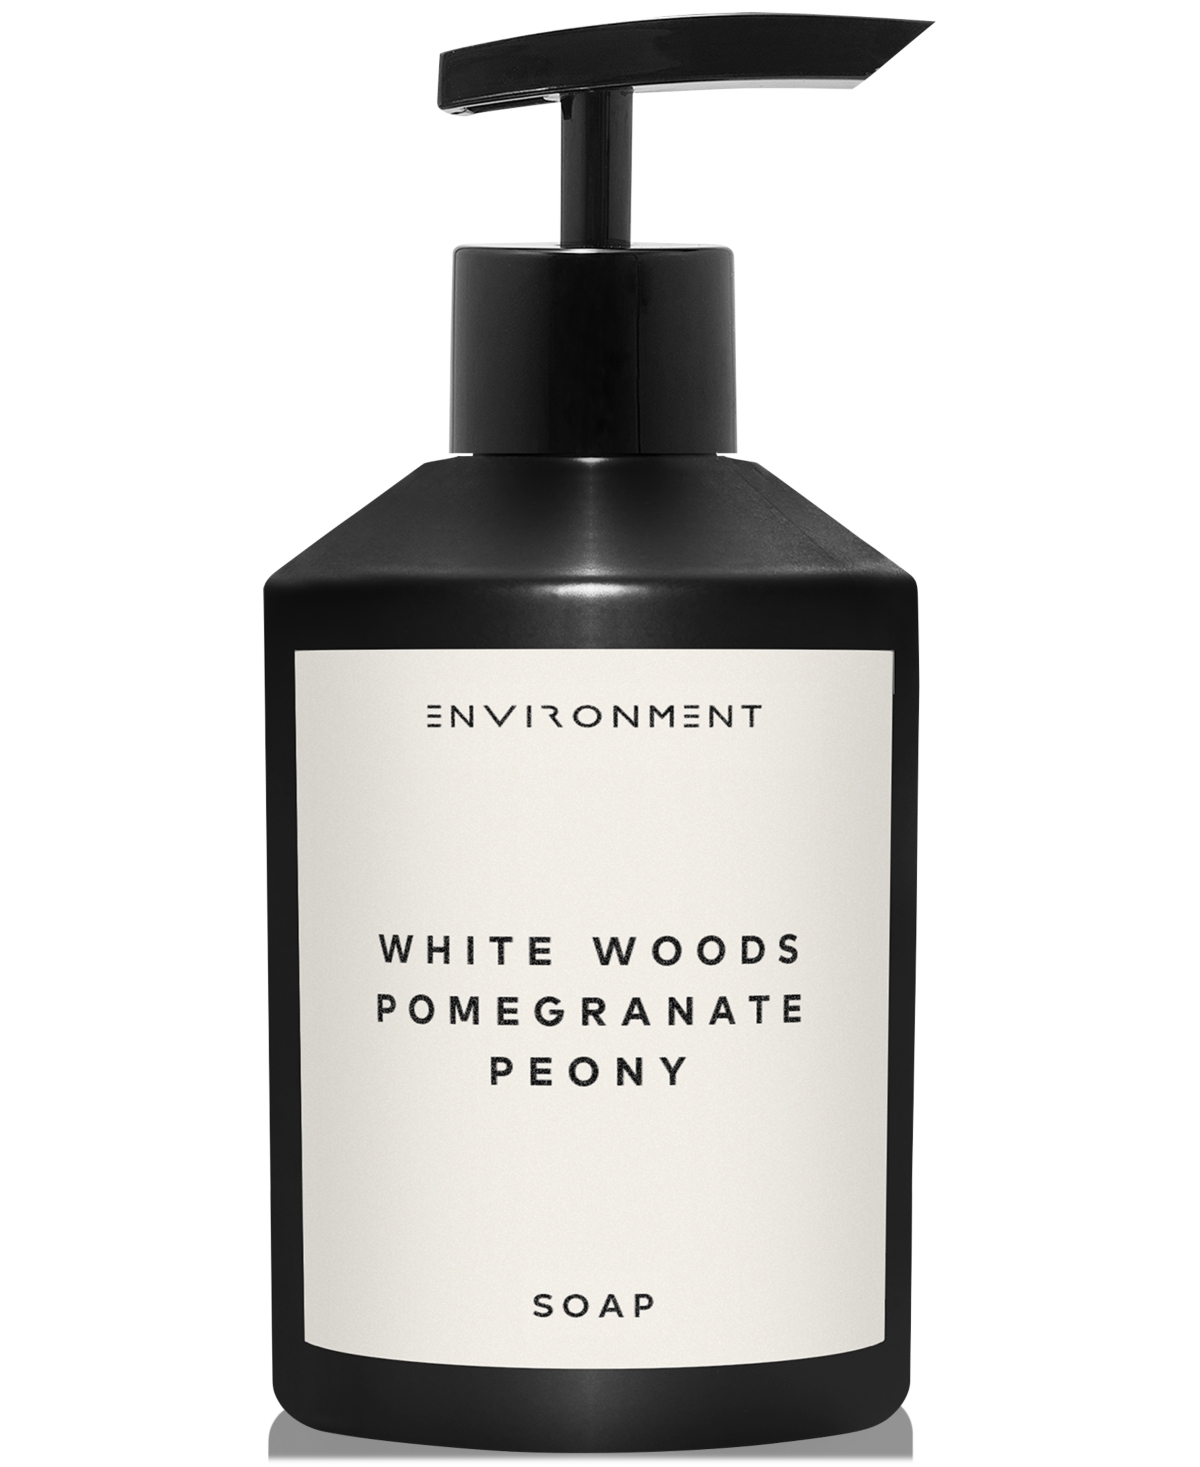 White Woods, Pomegranate & Peony Hand Soap (Inspired by 5-Star Luxury Hotels), 10 oz.